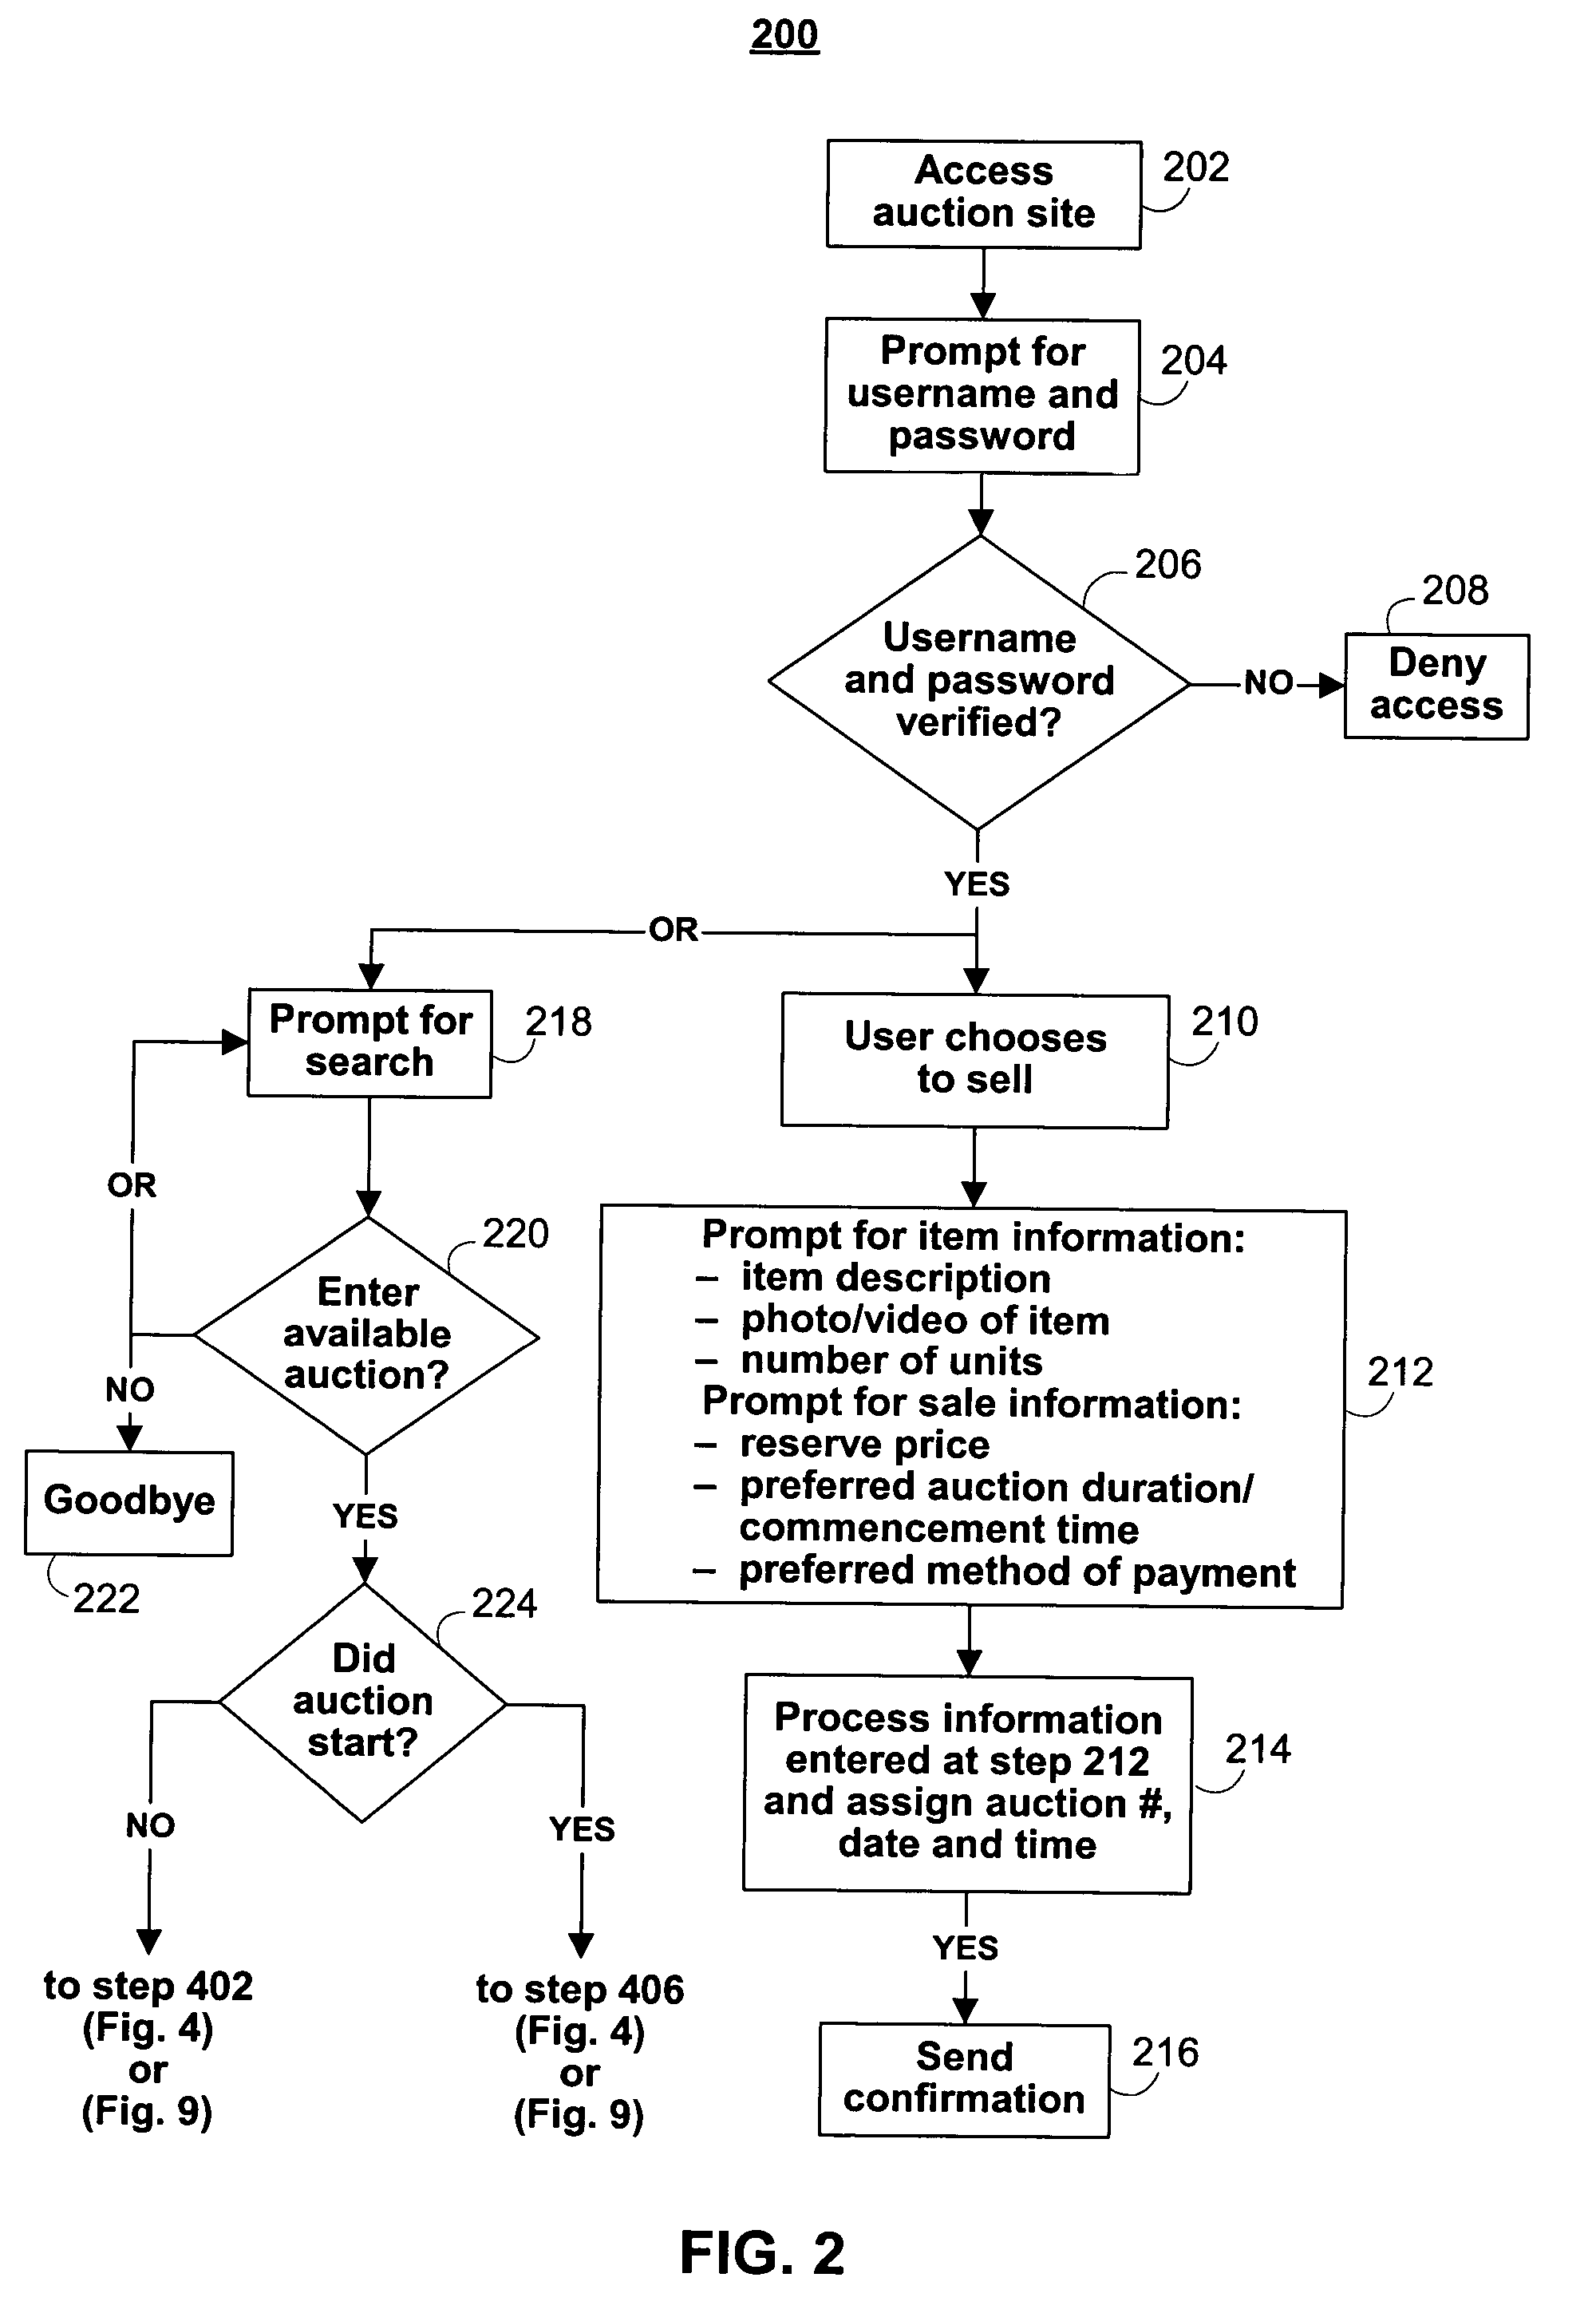 Systems and methods for automated internet-based auctions